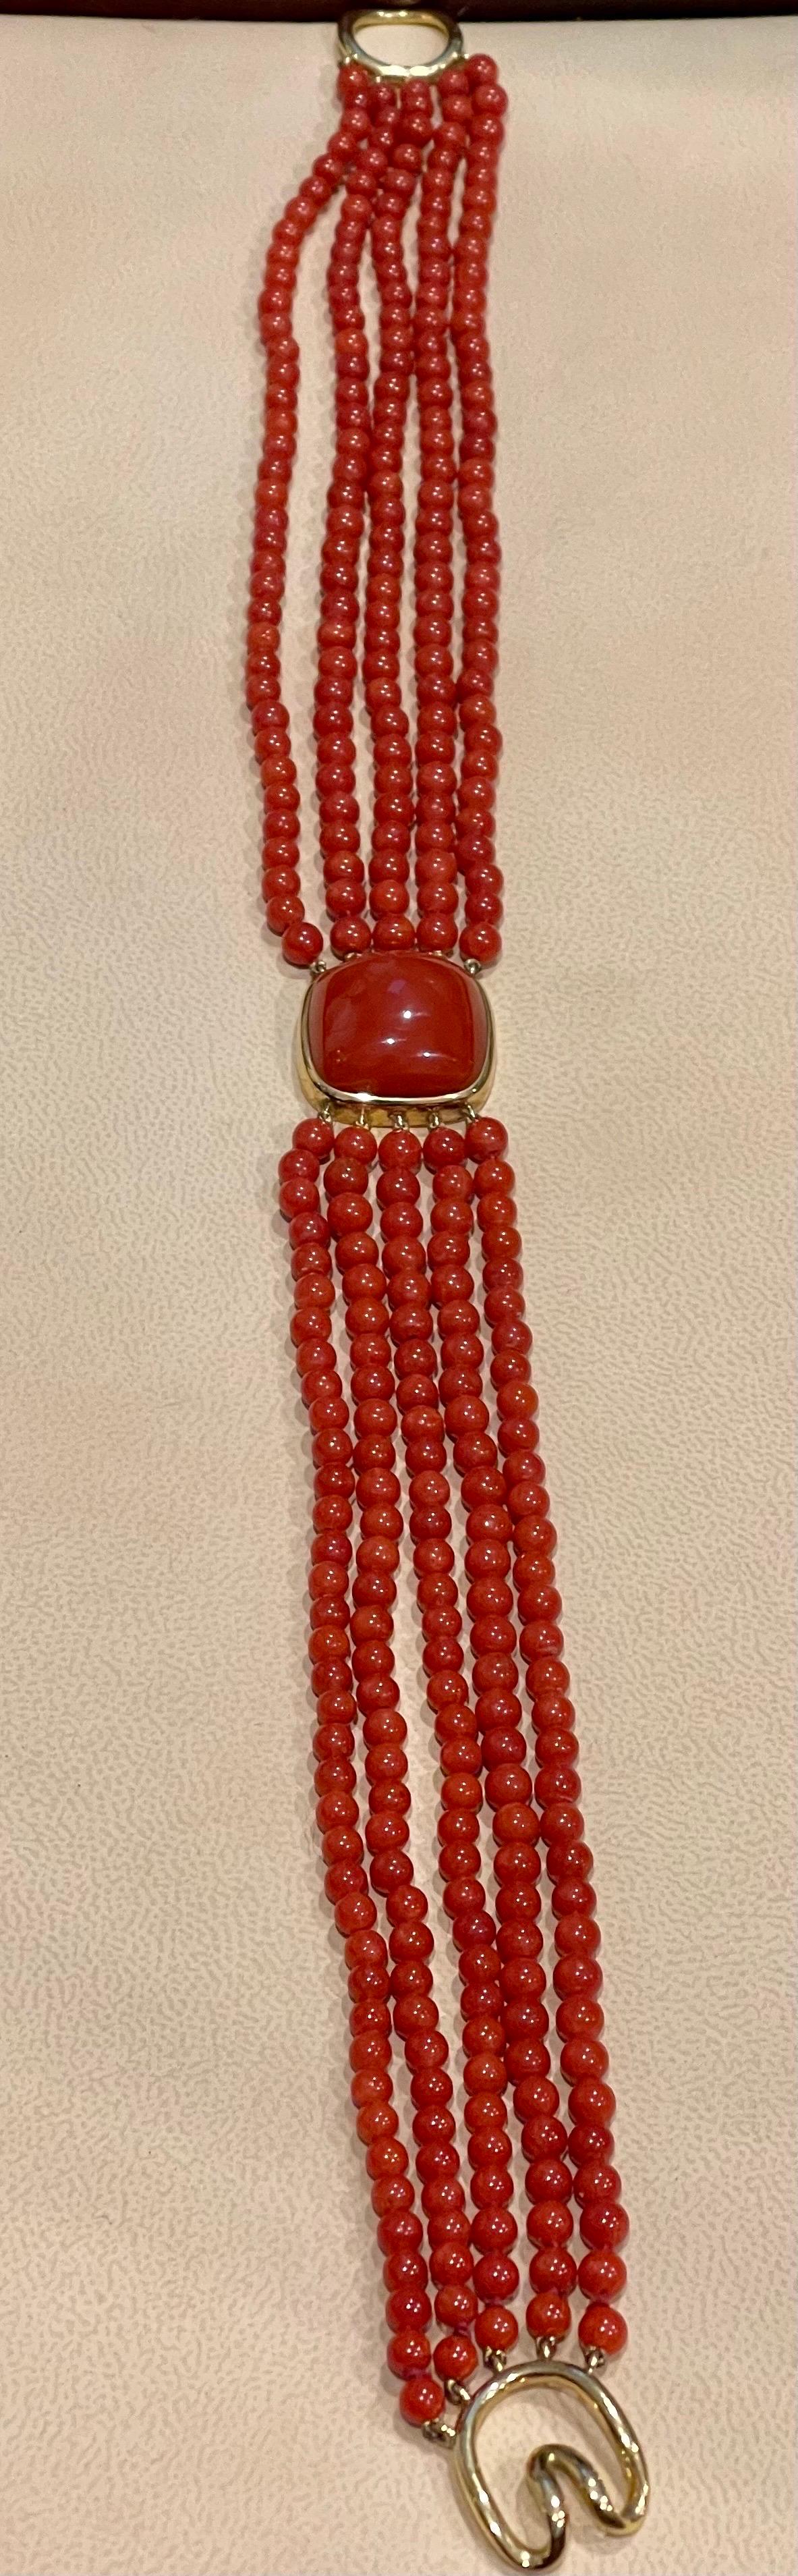 Tiffany & Co. Vintage Natural Coral Multi Layer Bead Necklace Coral Pendant 18KG 3